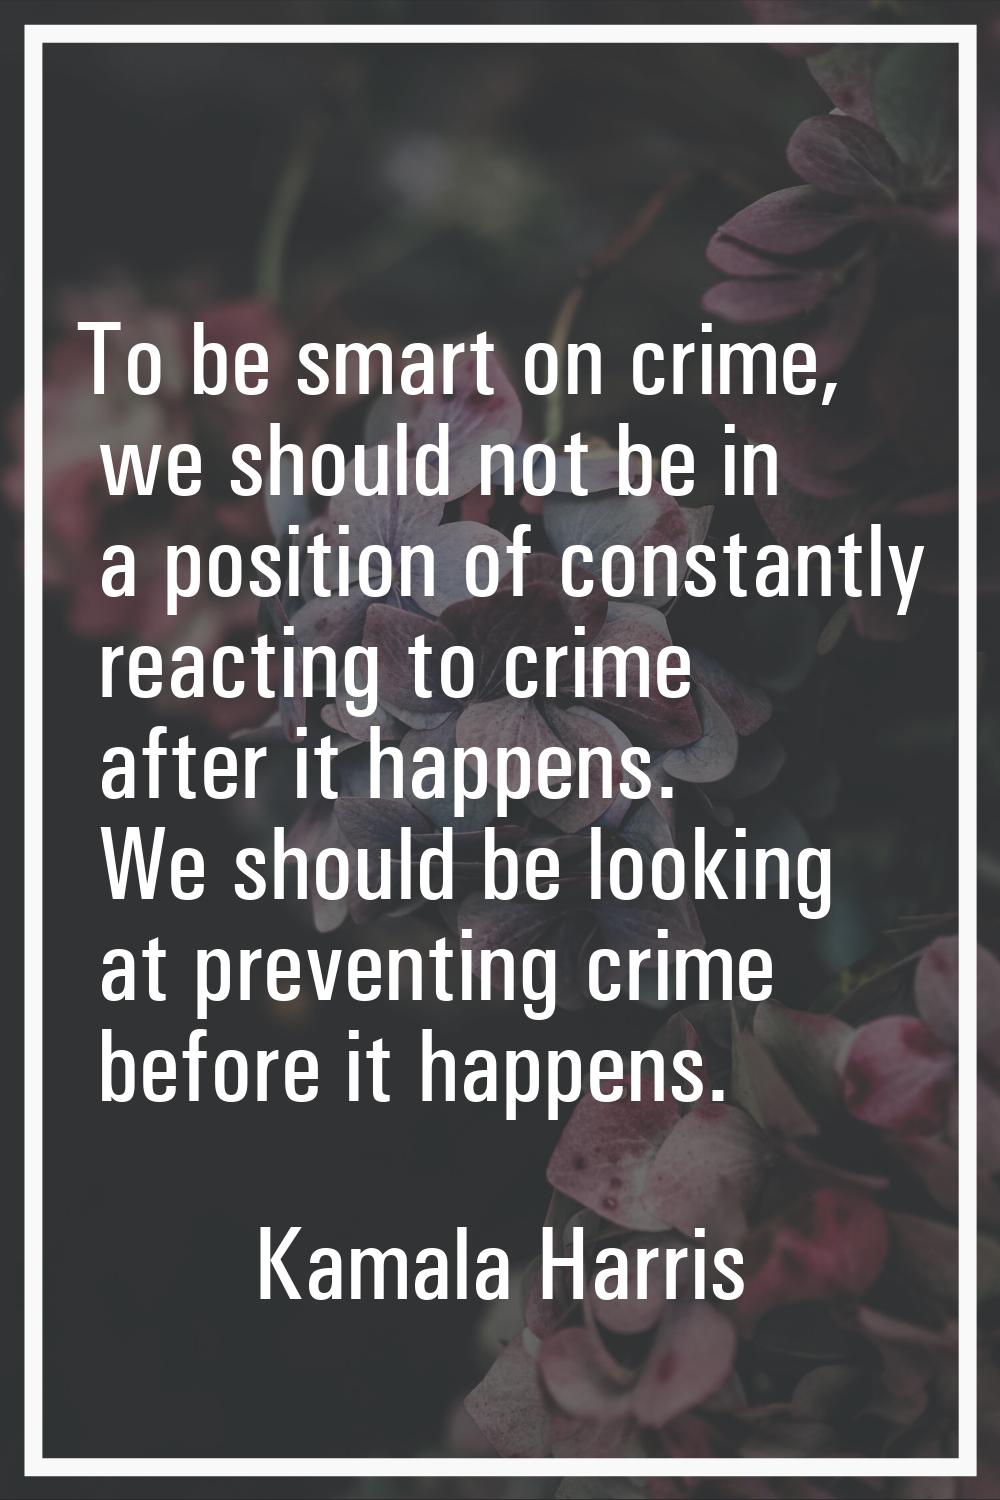 To be smart on crime, we should not be in a position of constantly reacting to crime after it happe